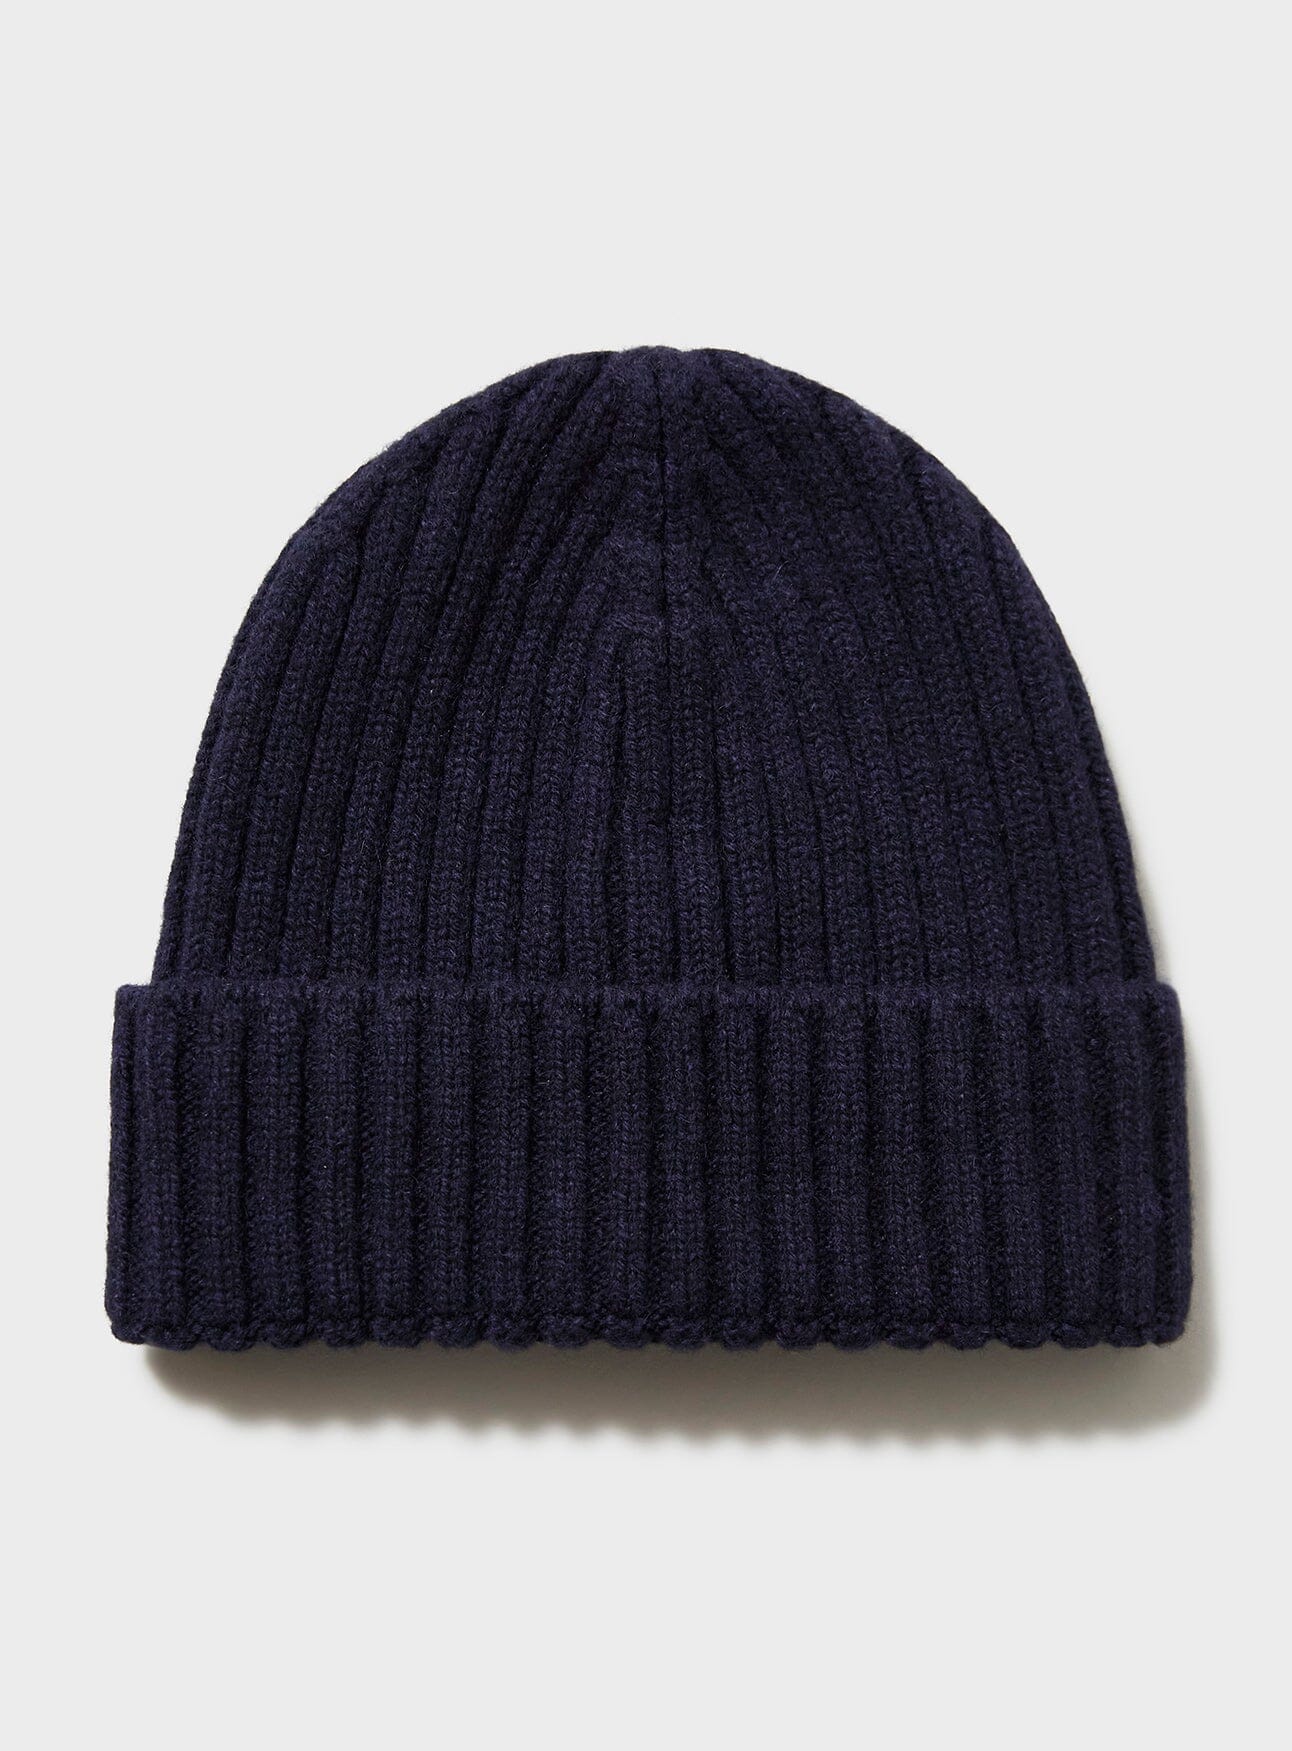 Recycled Cashmere Navy Beanie Hats Neem London 